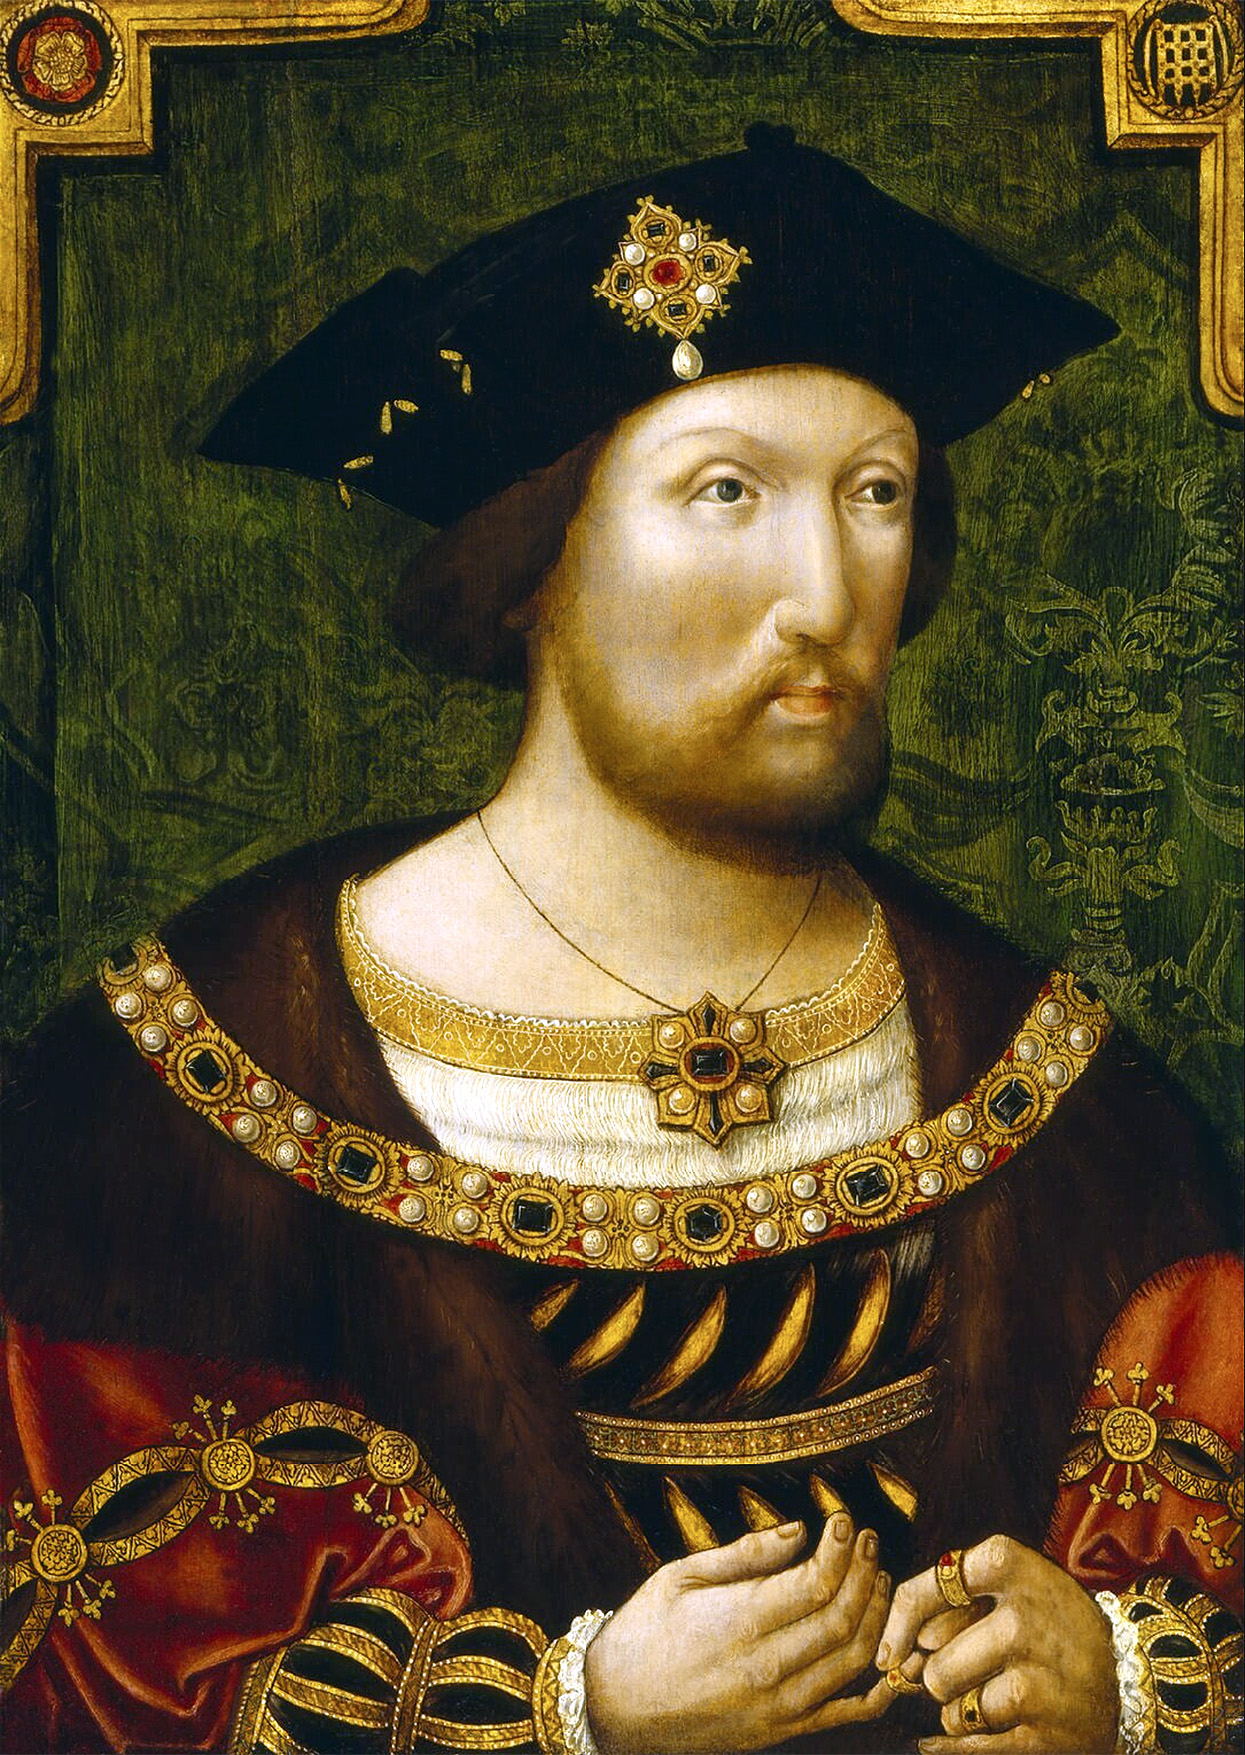 portraits-of-king-henry-viii-hans-holbein-and-his-legacy